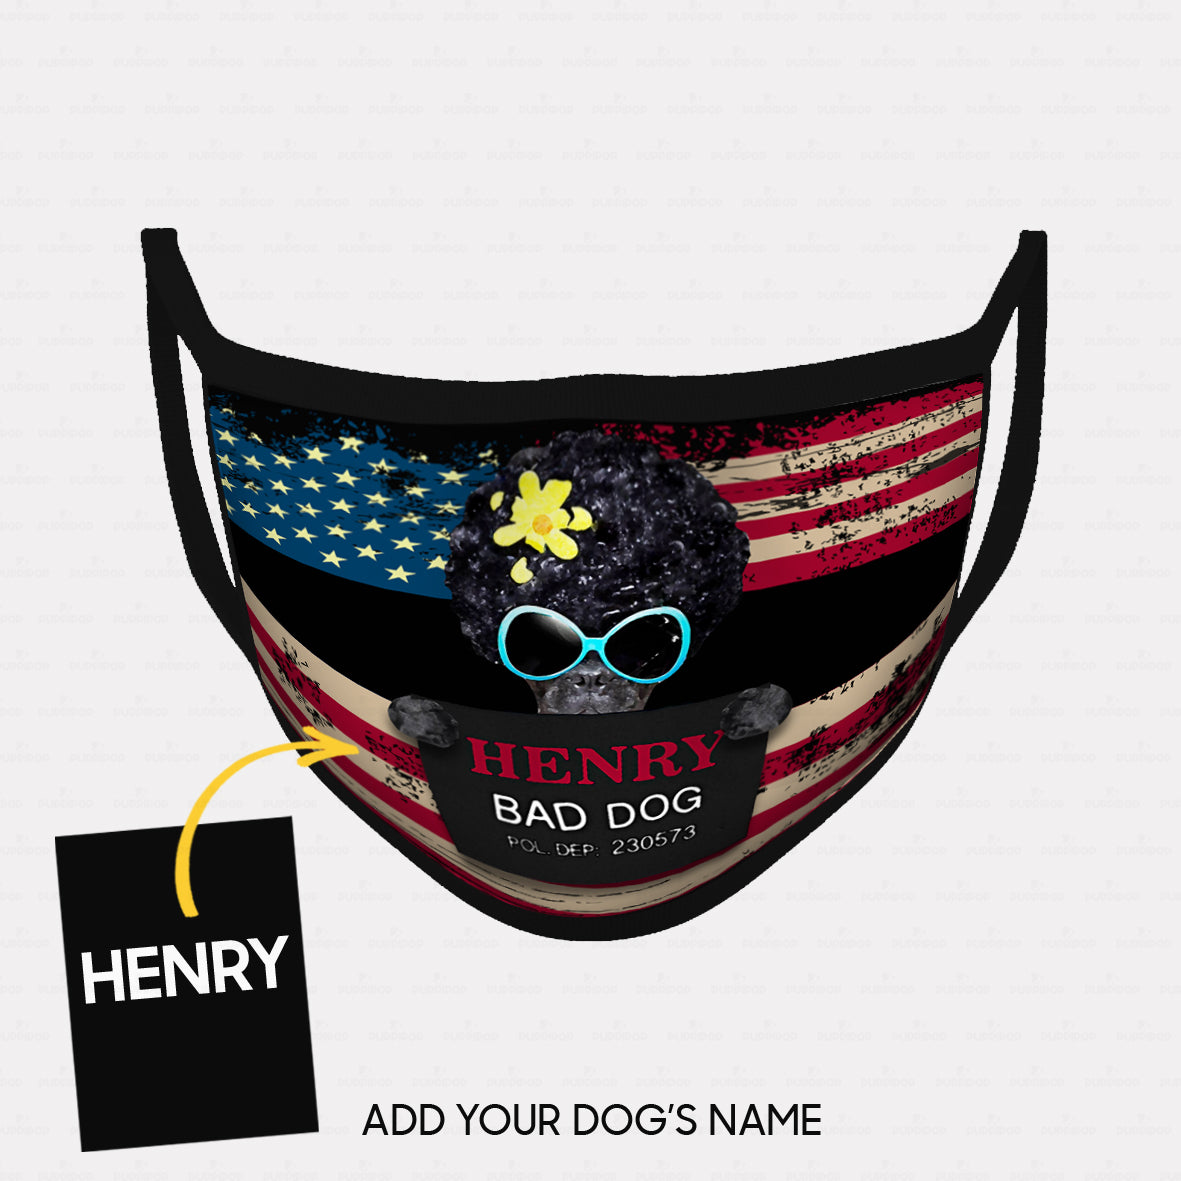 Personalized Dog Gift Idea - Bad Dog With Curly Hair For Dog Lovers - Cloth Mask